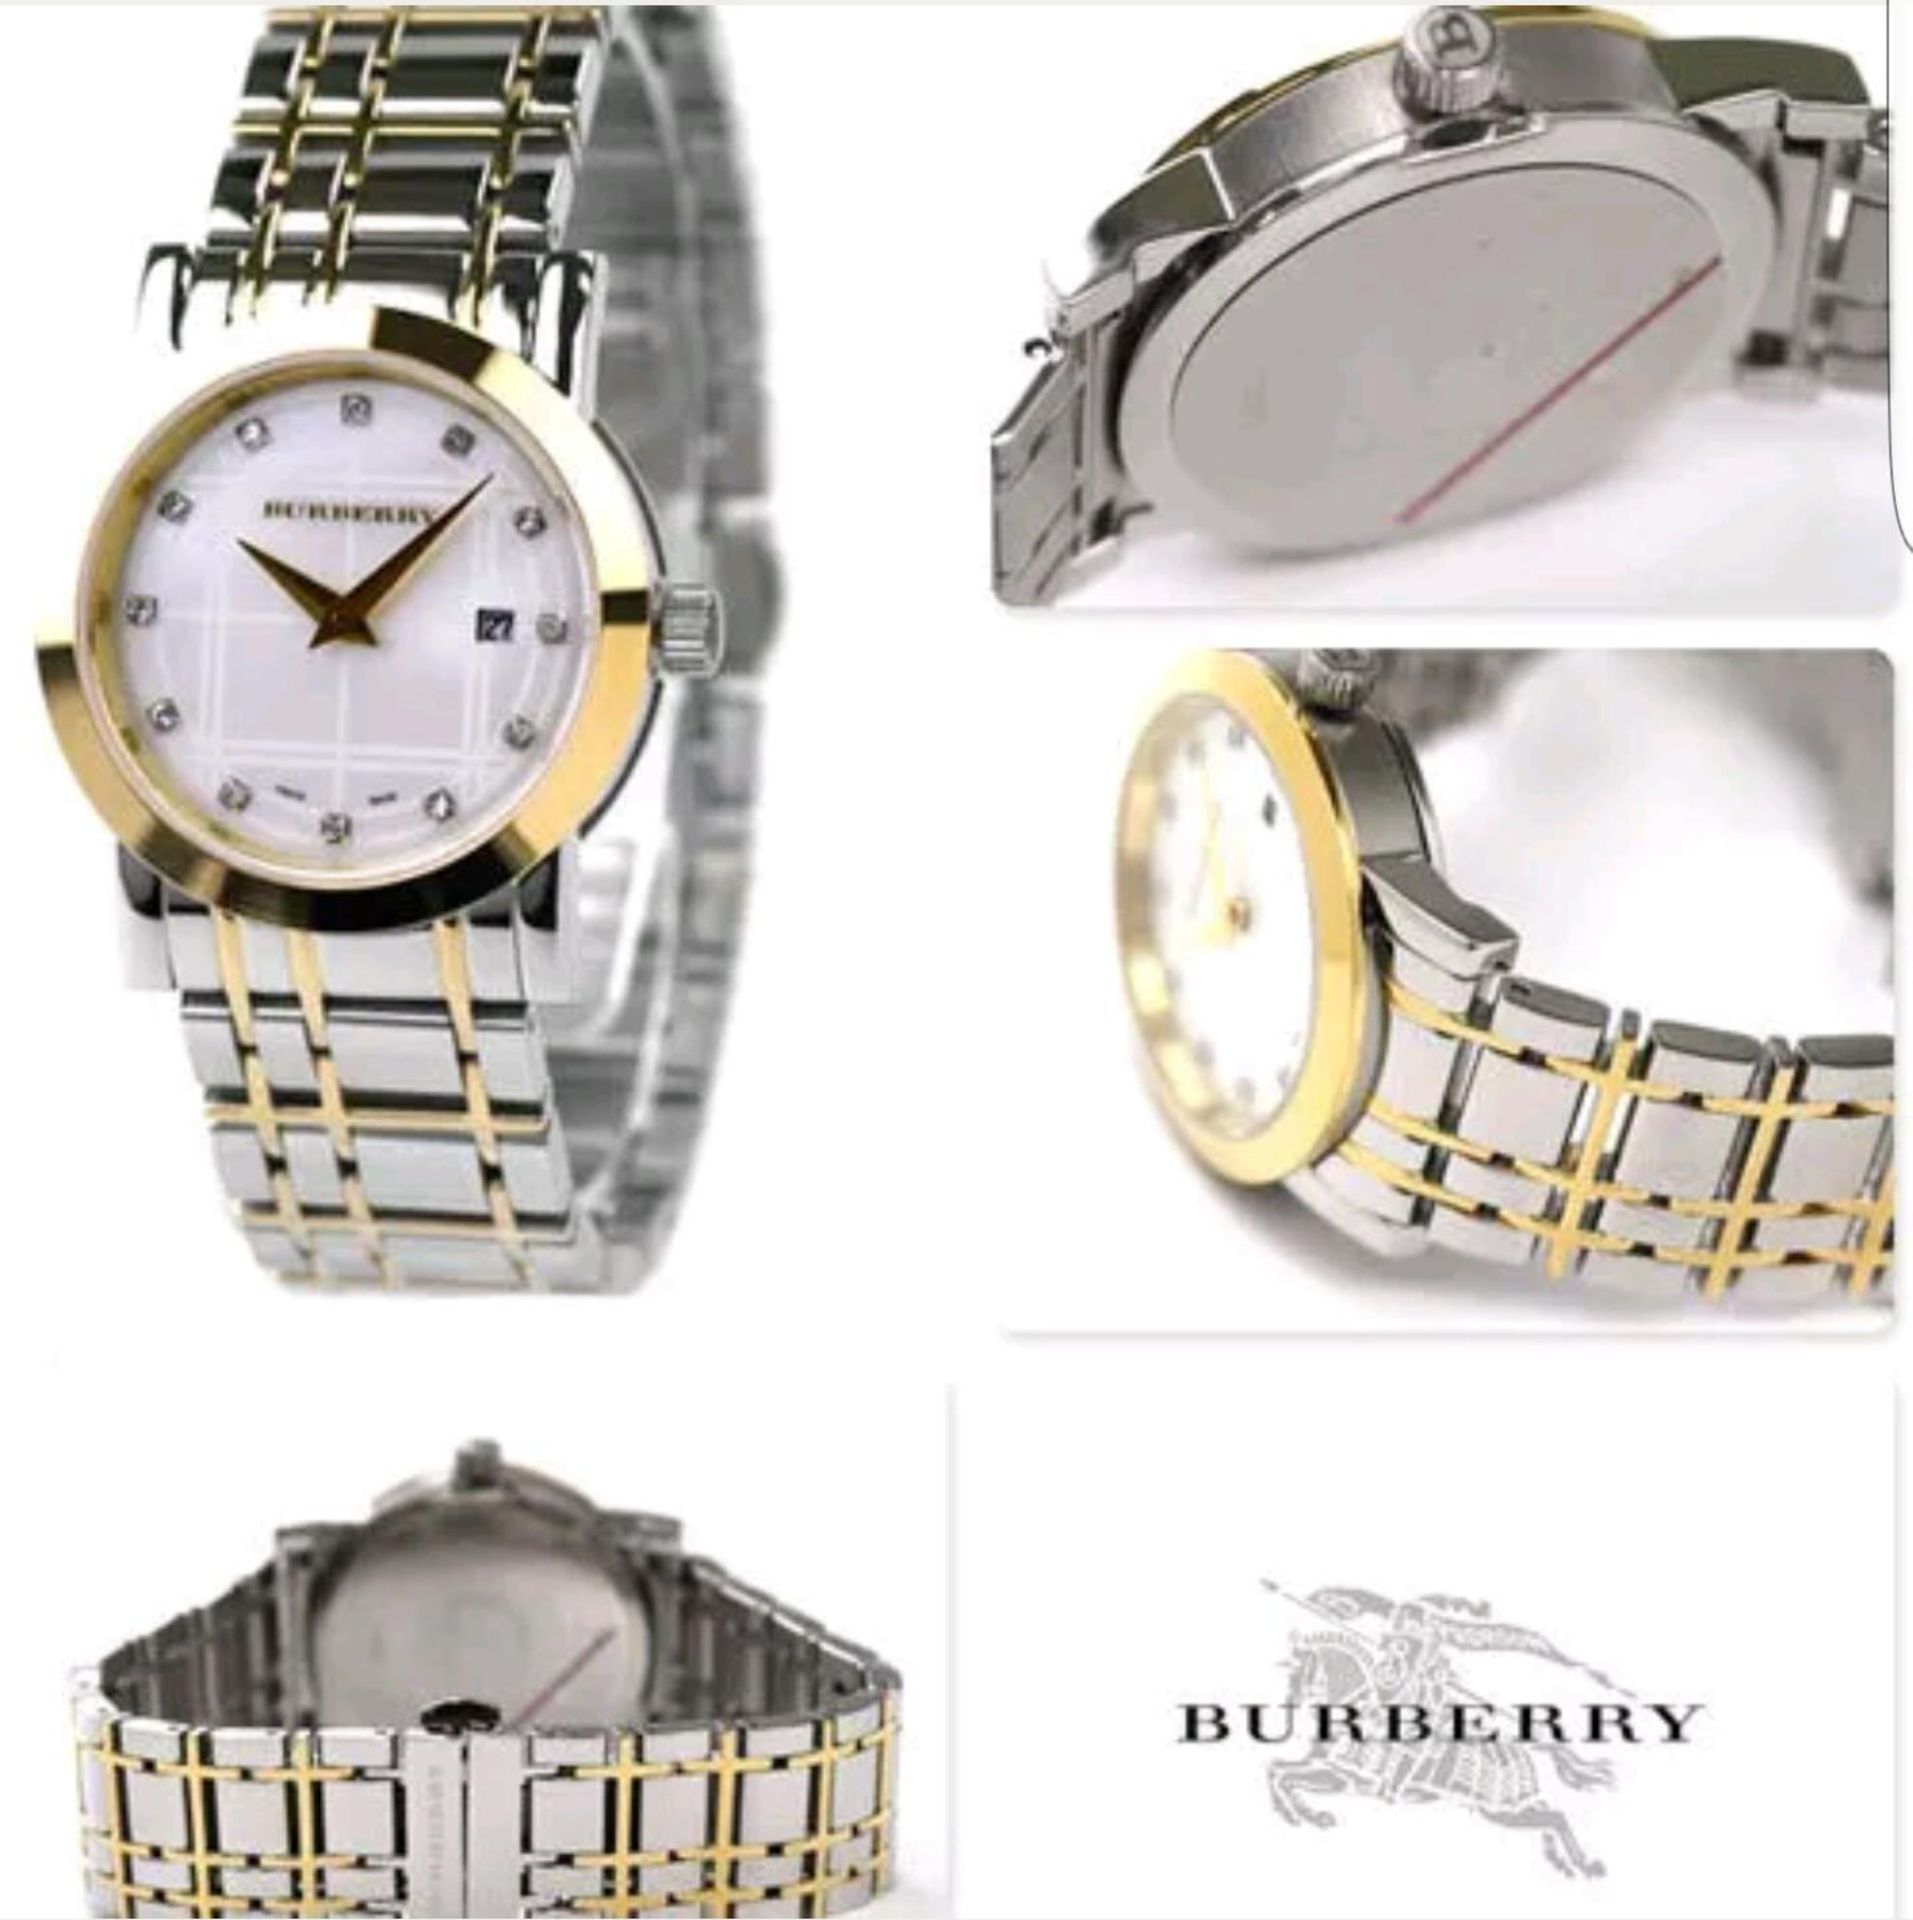 BRAND NEW LADIES BURBERRY WATCH, BU1375, COMPLETE WITH ORIGINAL BOX AND MANUAL - RRP £399 - Image 2 of 2